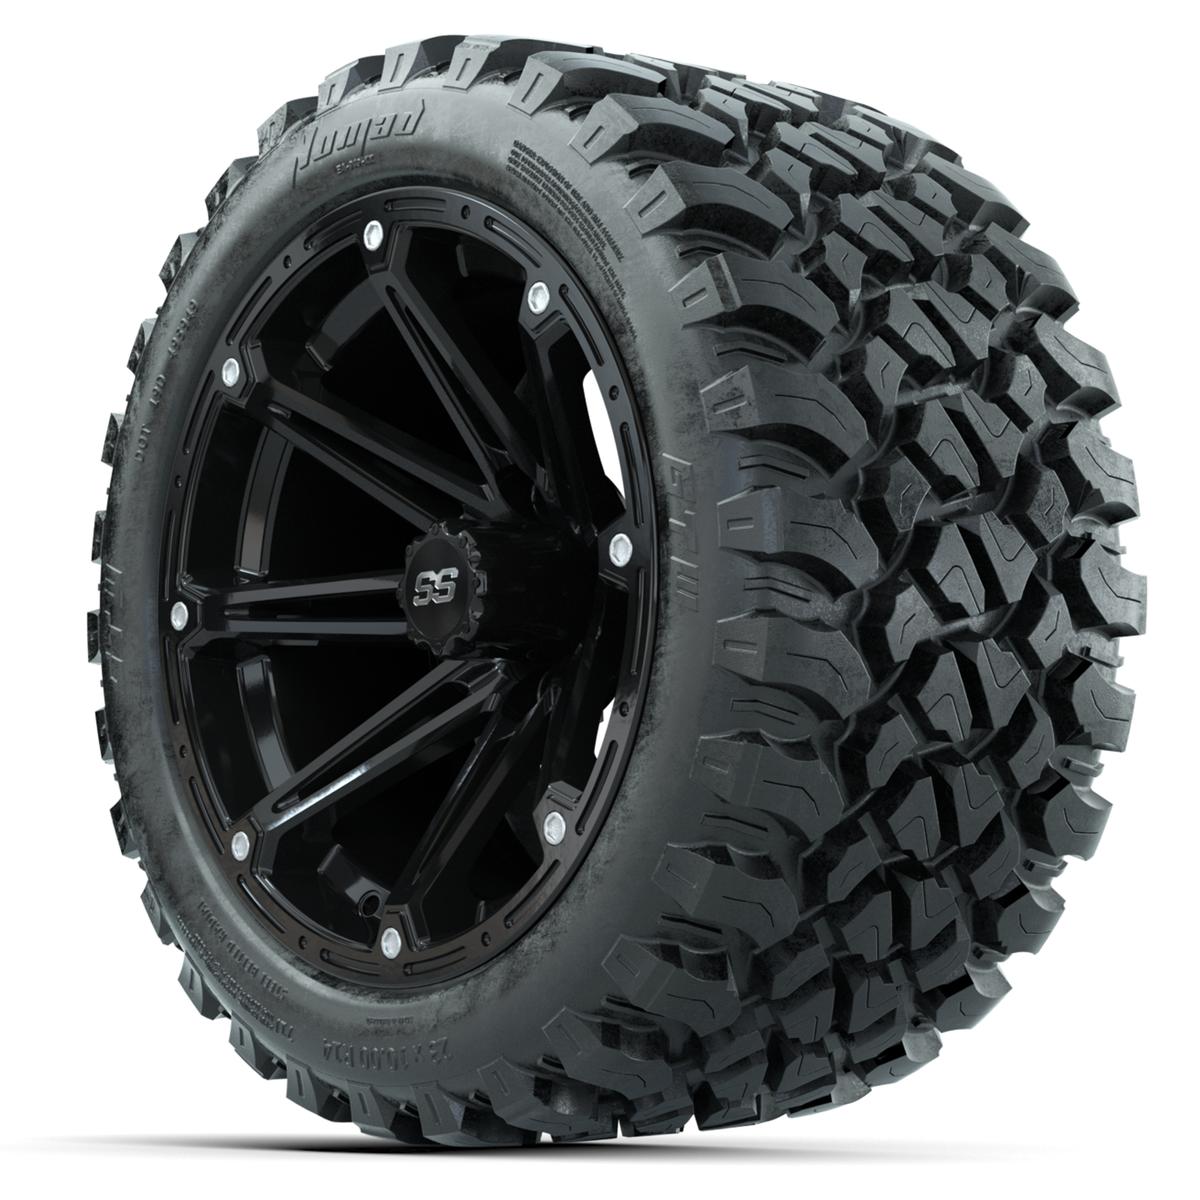 Set of (4) 14 in GTW Element Wheels with 23x10-14 GTW Nomad All-Terrain Tires